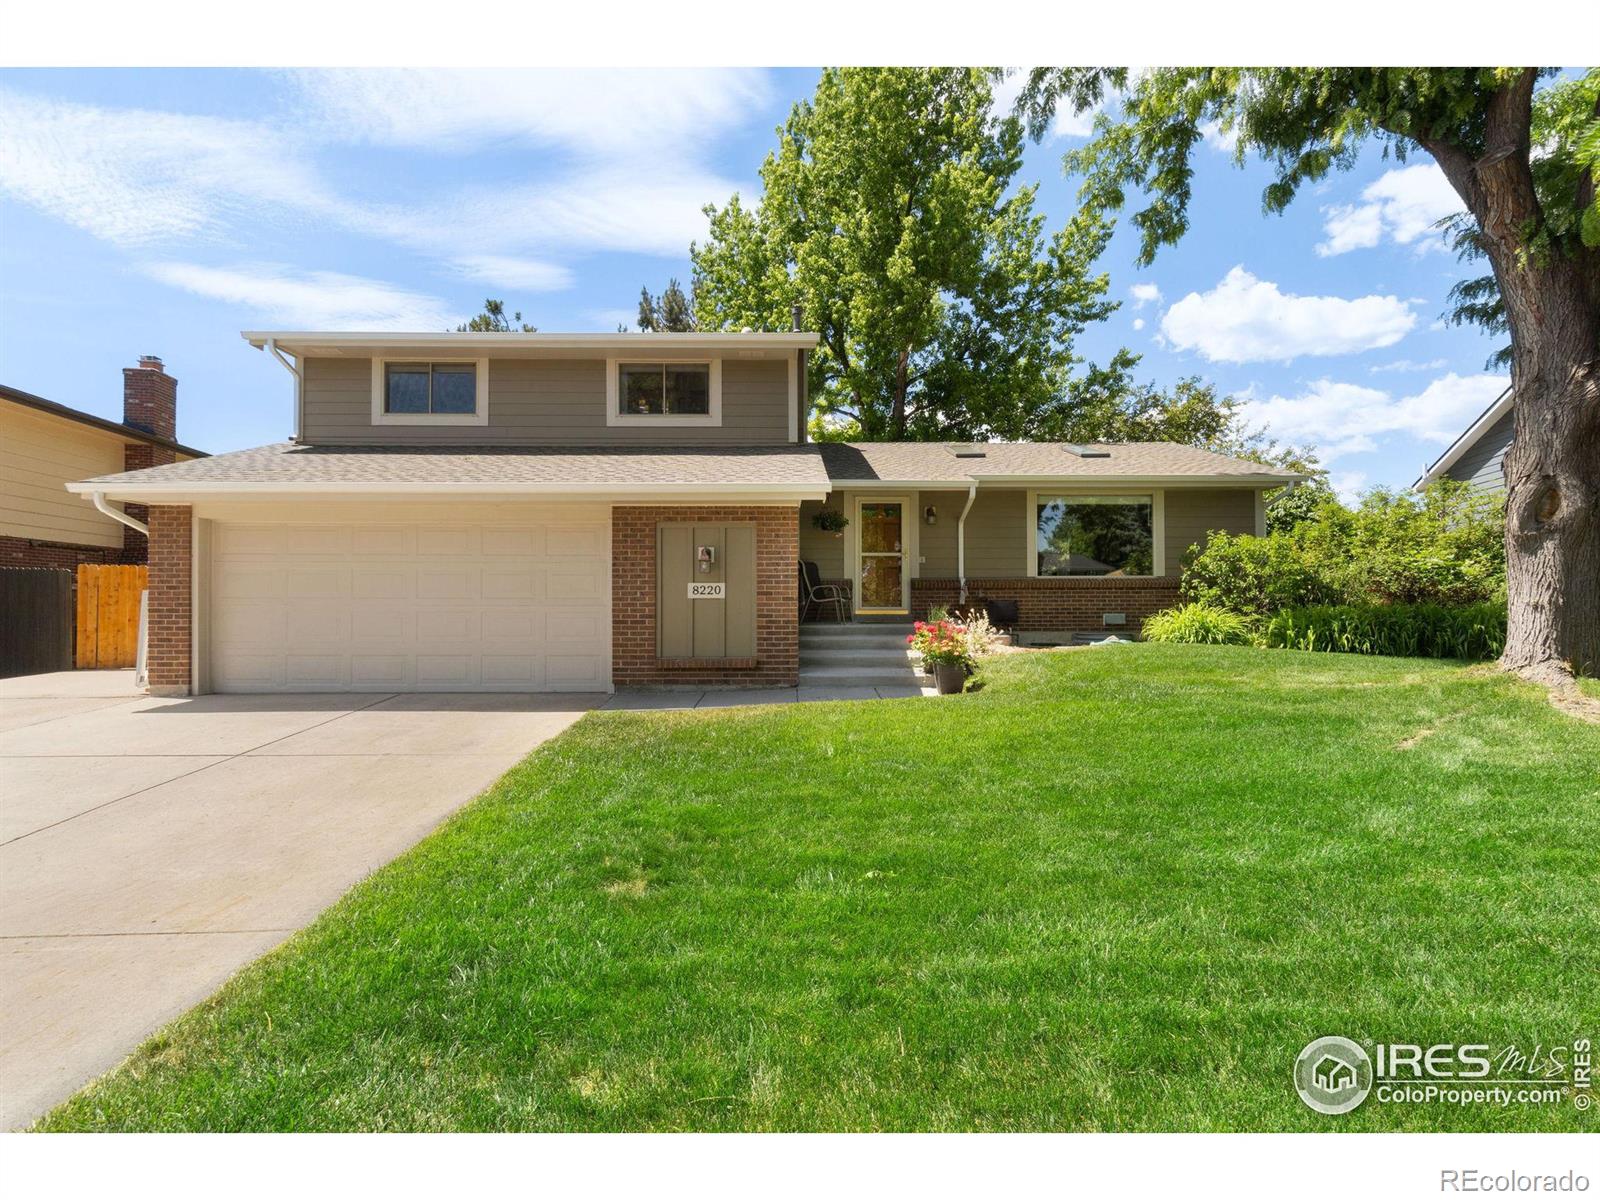 8220 W Hoover Place, littleton MLS: 4567891012151 Beds: 3 Baths: 3 Price: $679,900